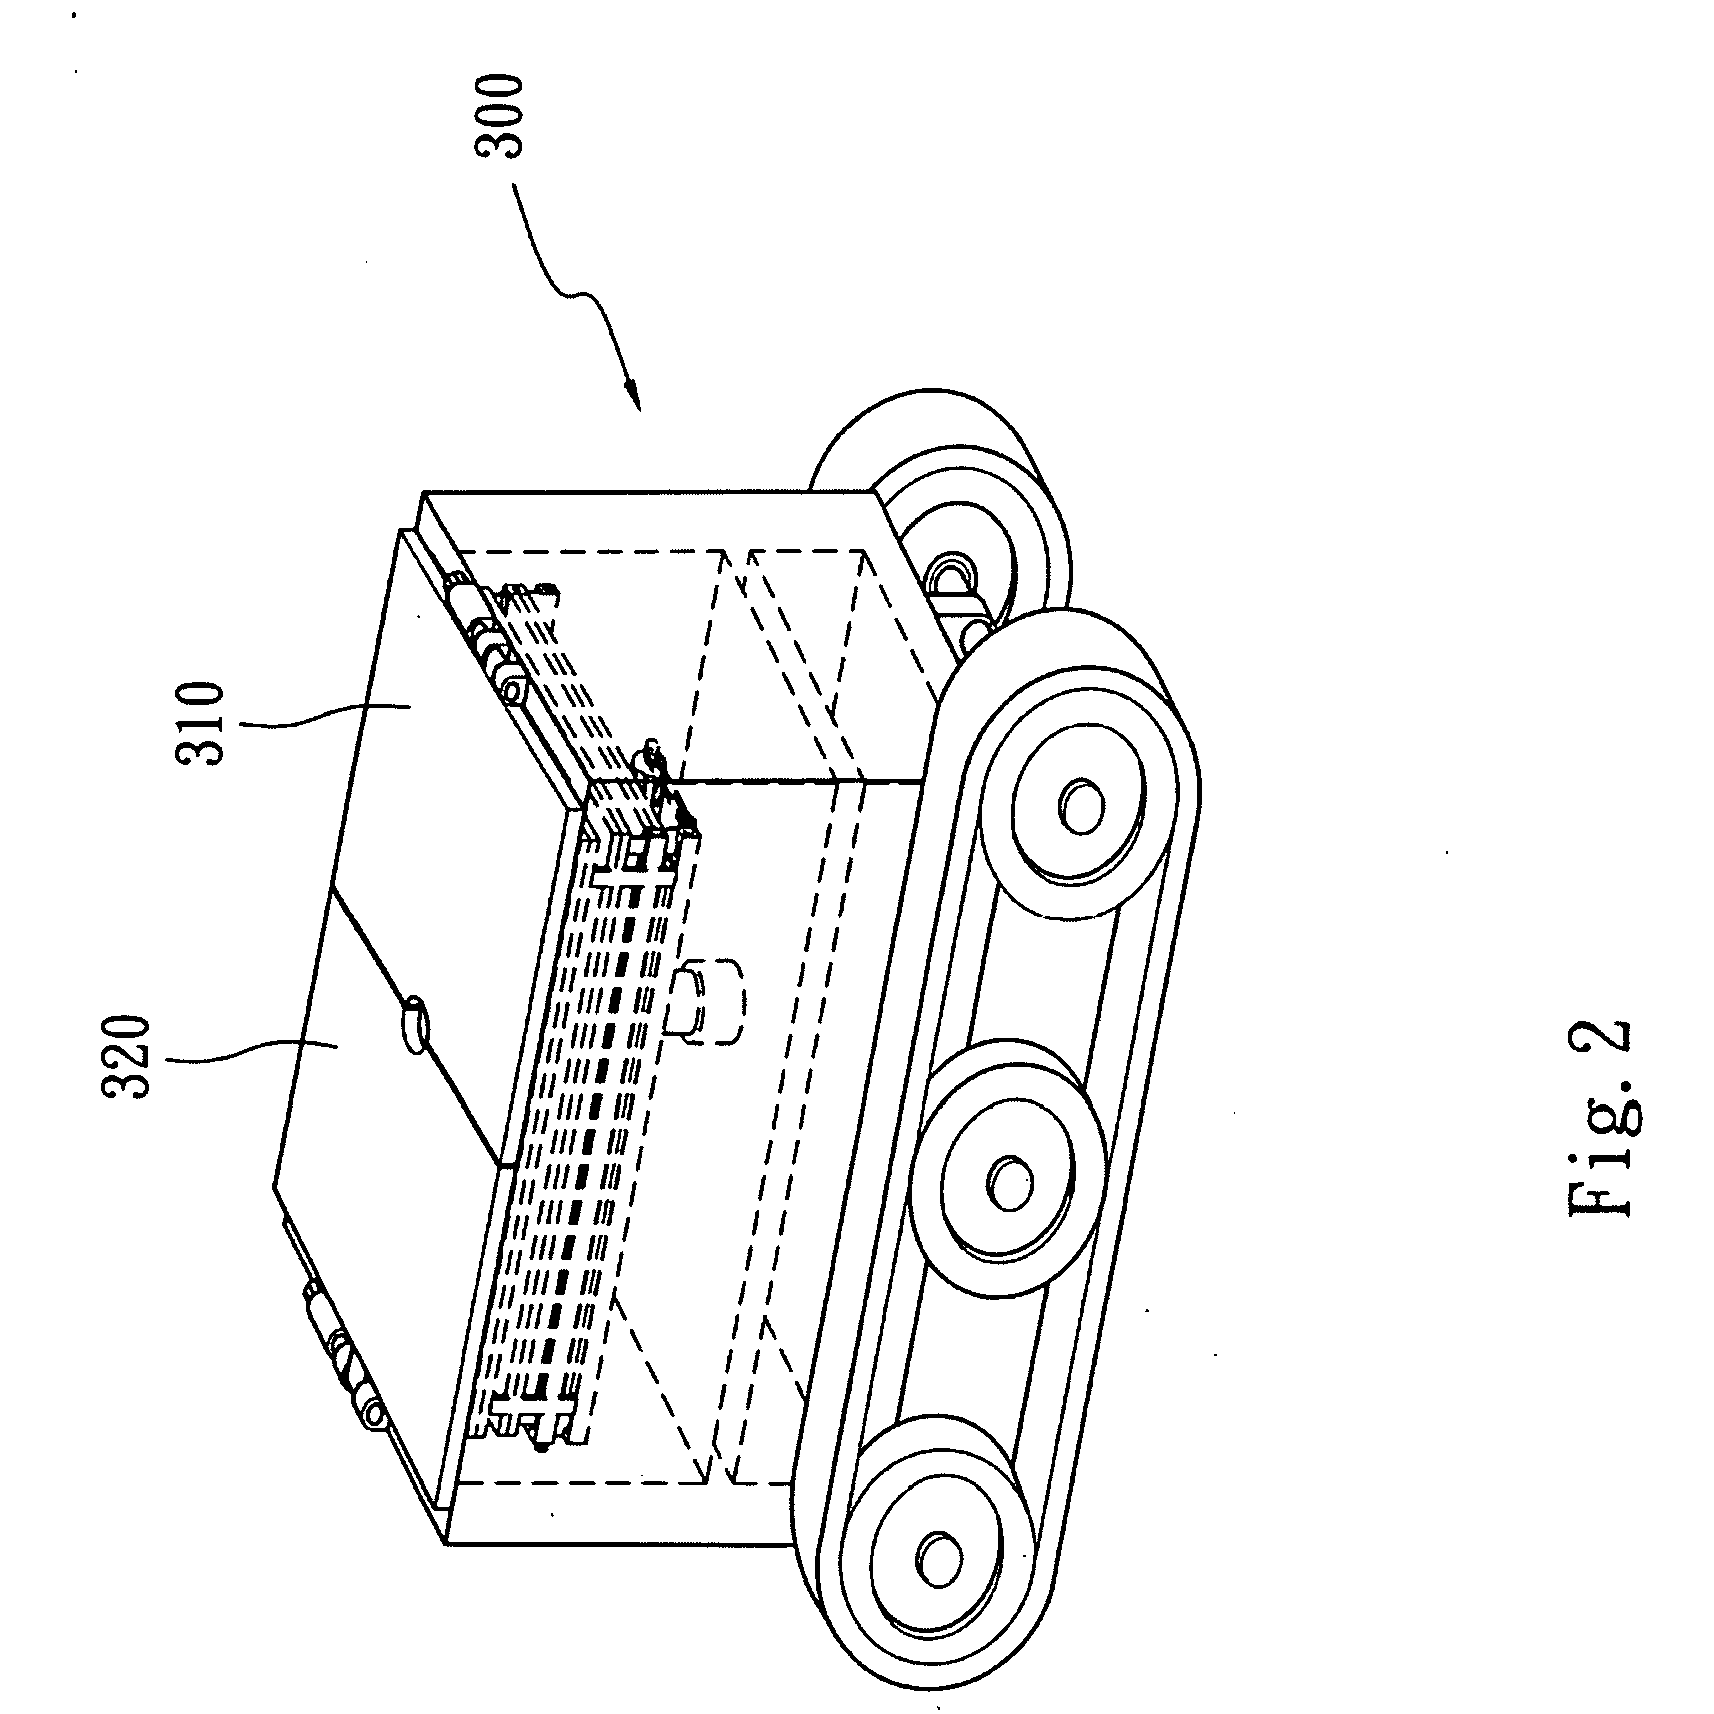 Self-propelled Solar Tracking Apparatus with Multi-layer Solar Panel